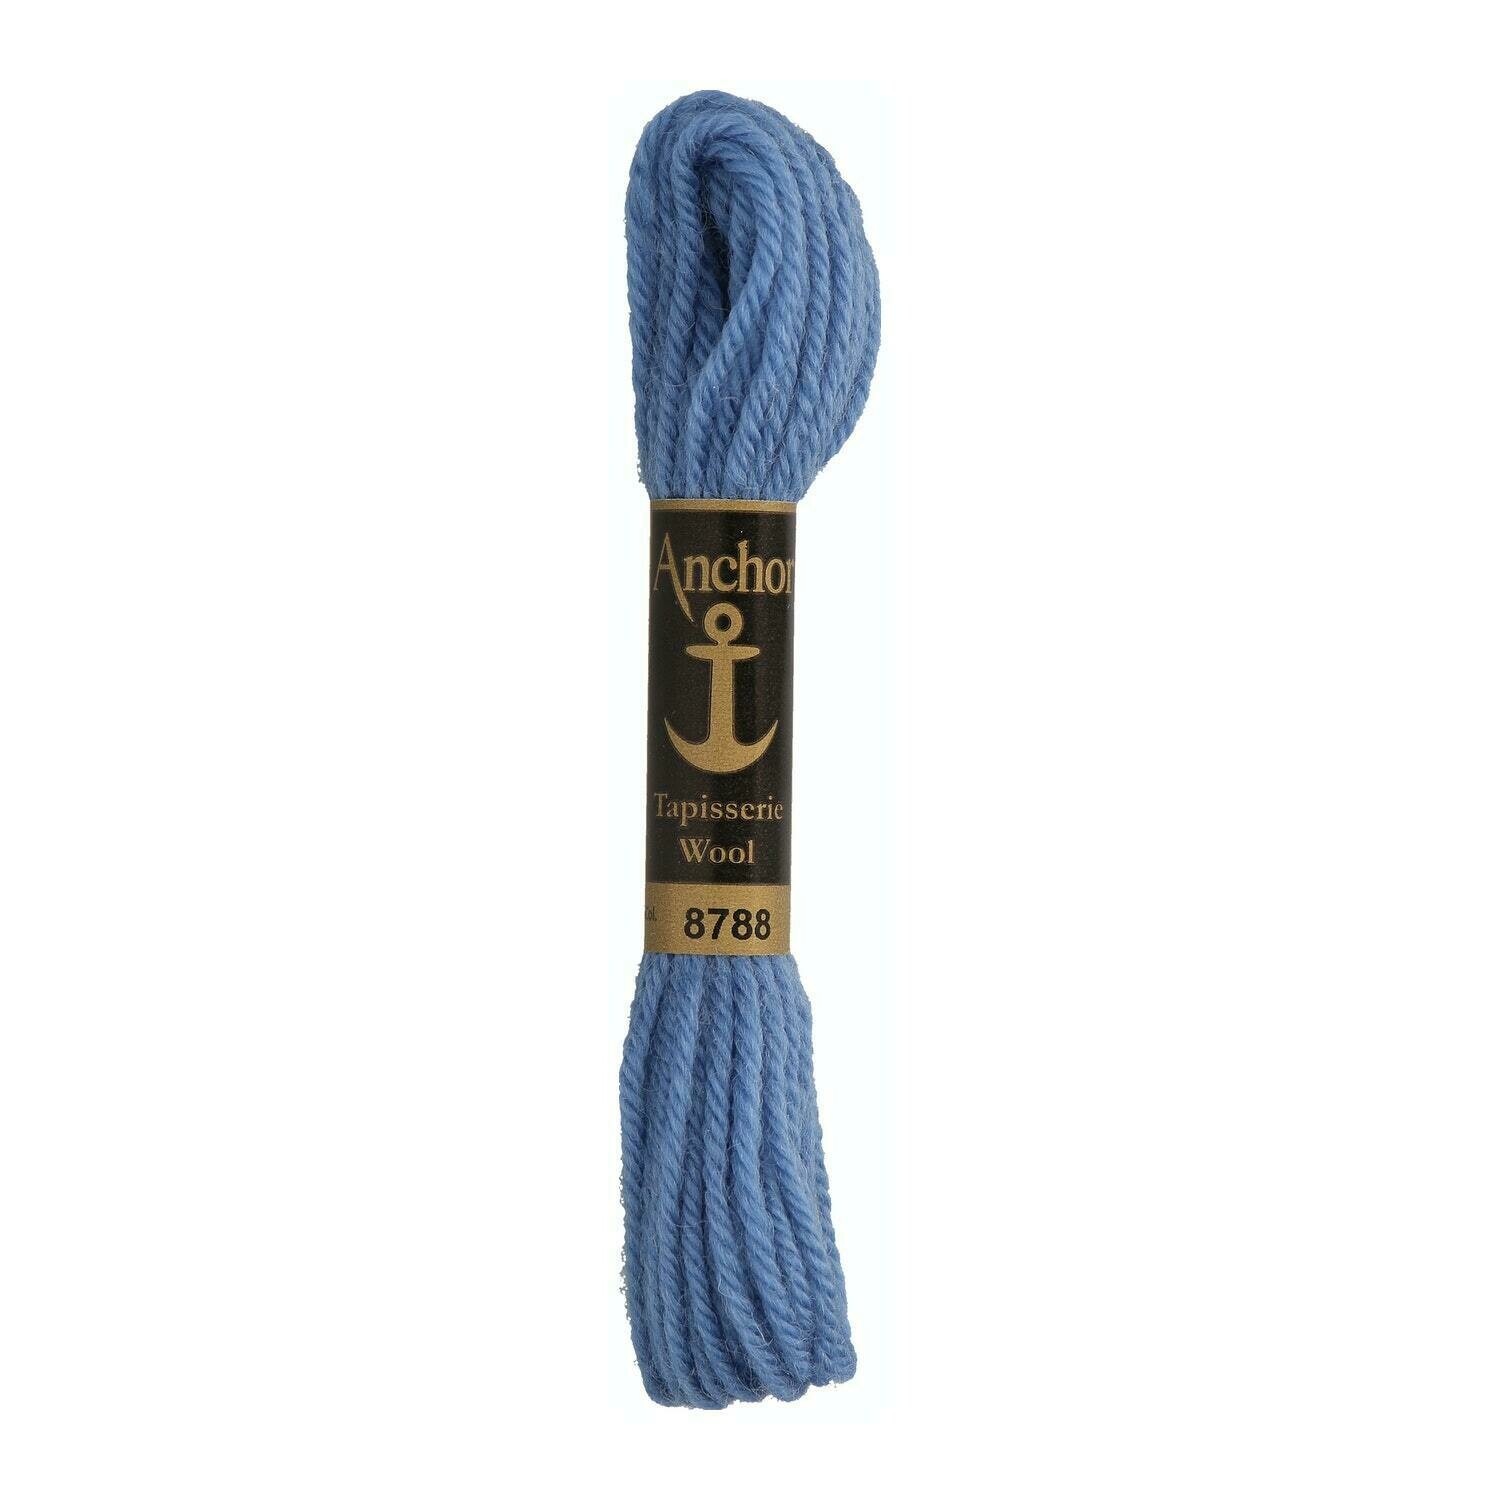 Anchor Tapisserie Wool #08788